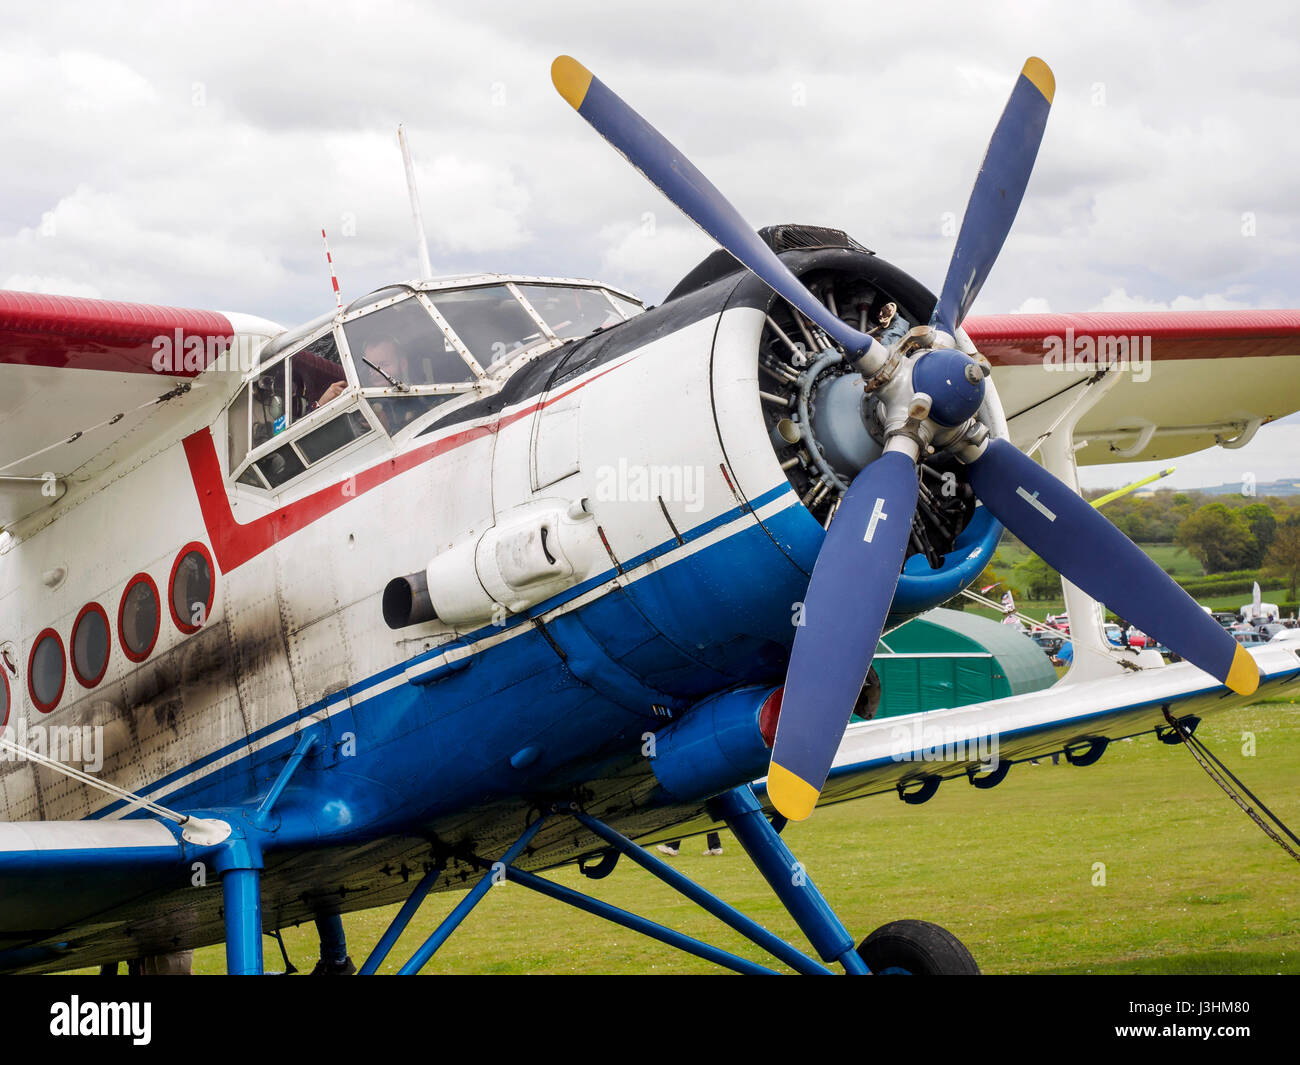 A Russian built Antonov An-2TP biplane built in 1949 for passenger and freight transport. This privcately owned example is based at Popham Airfield. Stock Photo